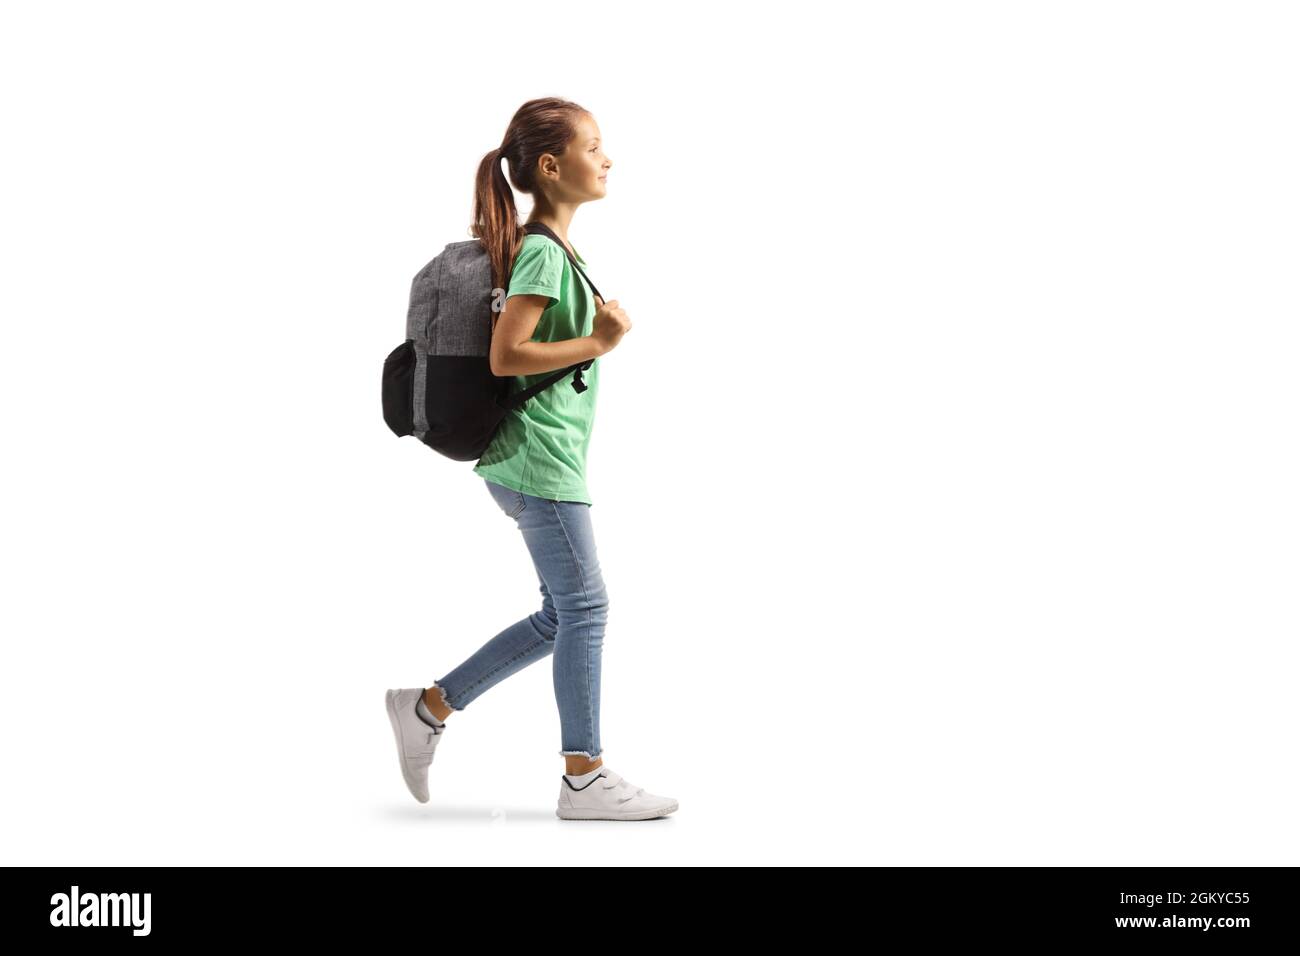 Full length profile shot of a girl carrying a backpack and walking isolated on white background Stock Photo